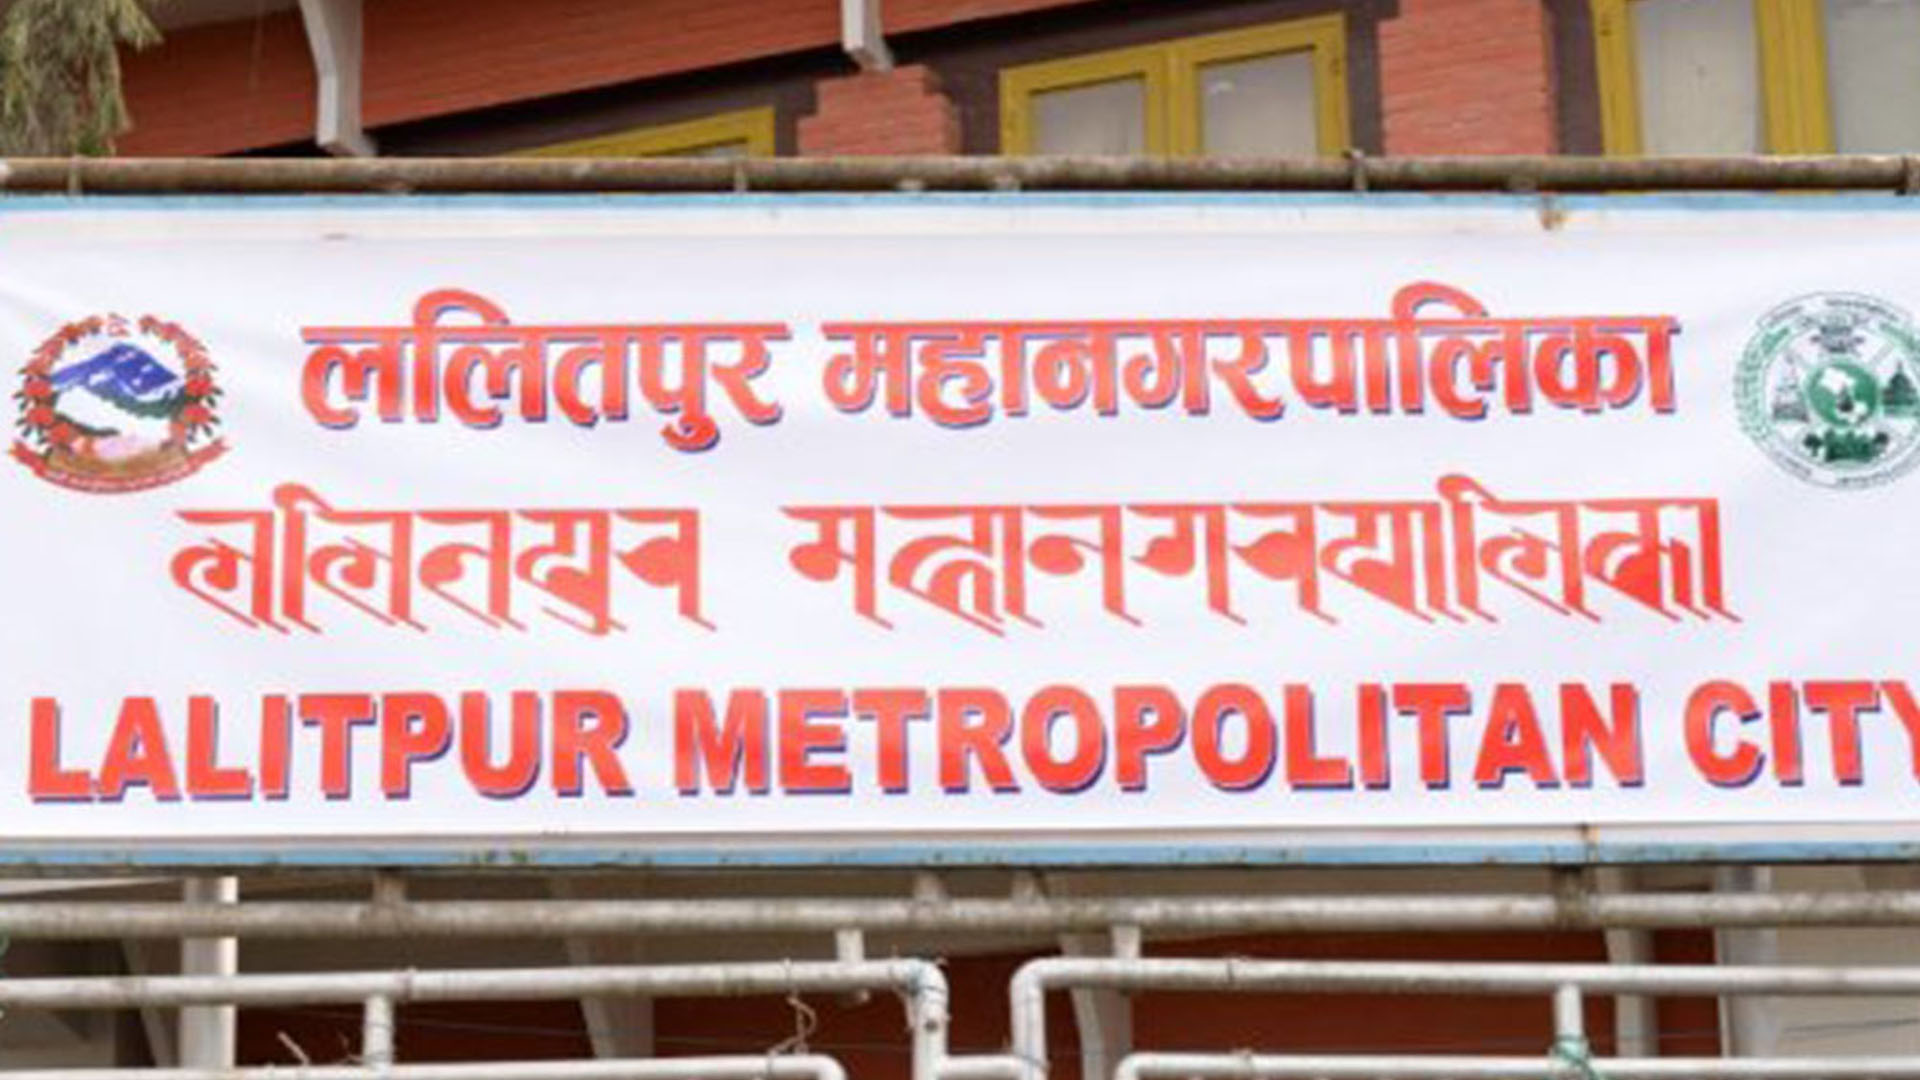 Acceleration of road construction within the city: Lalitpur metropolis